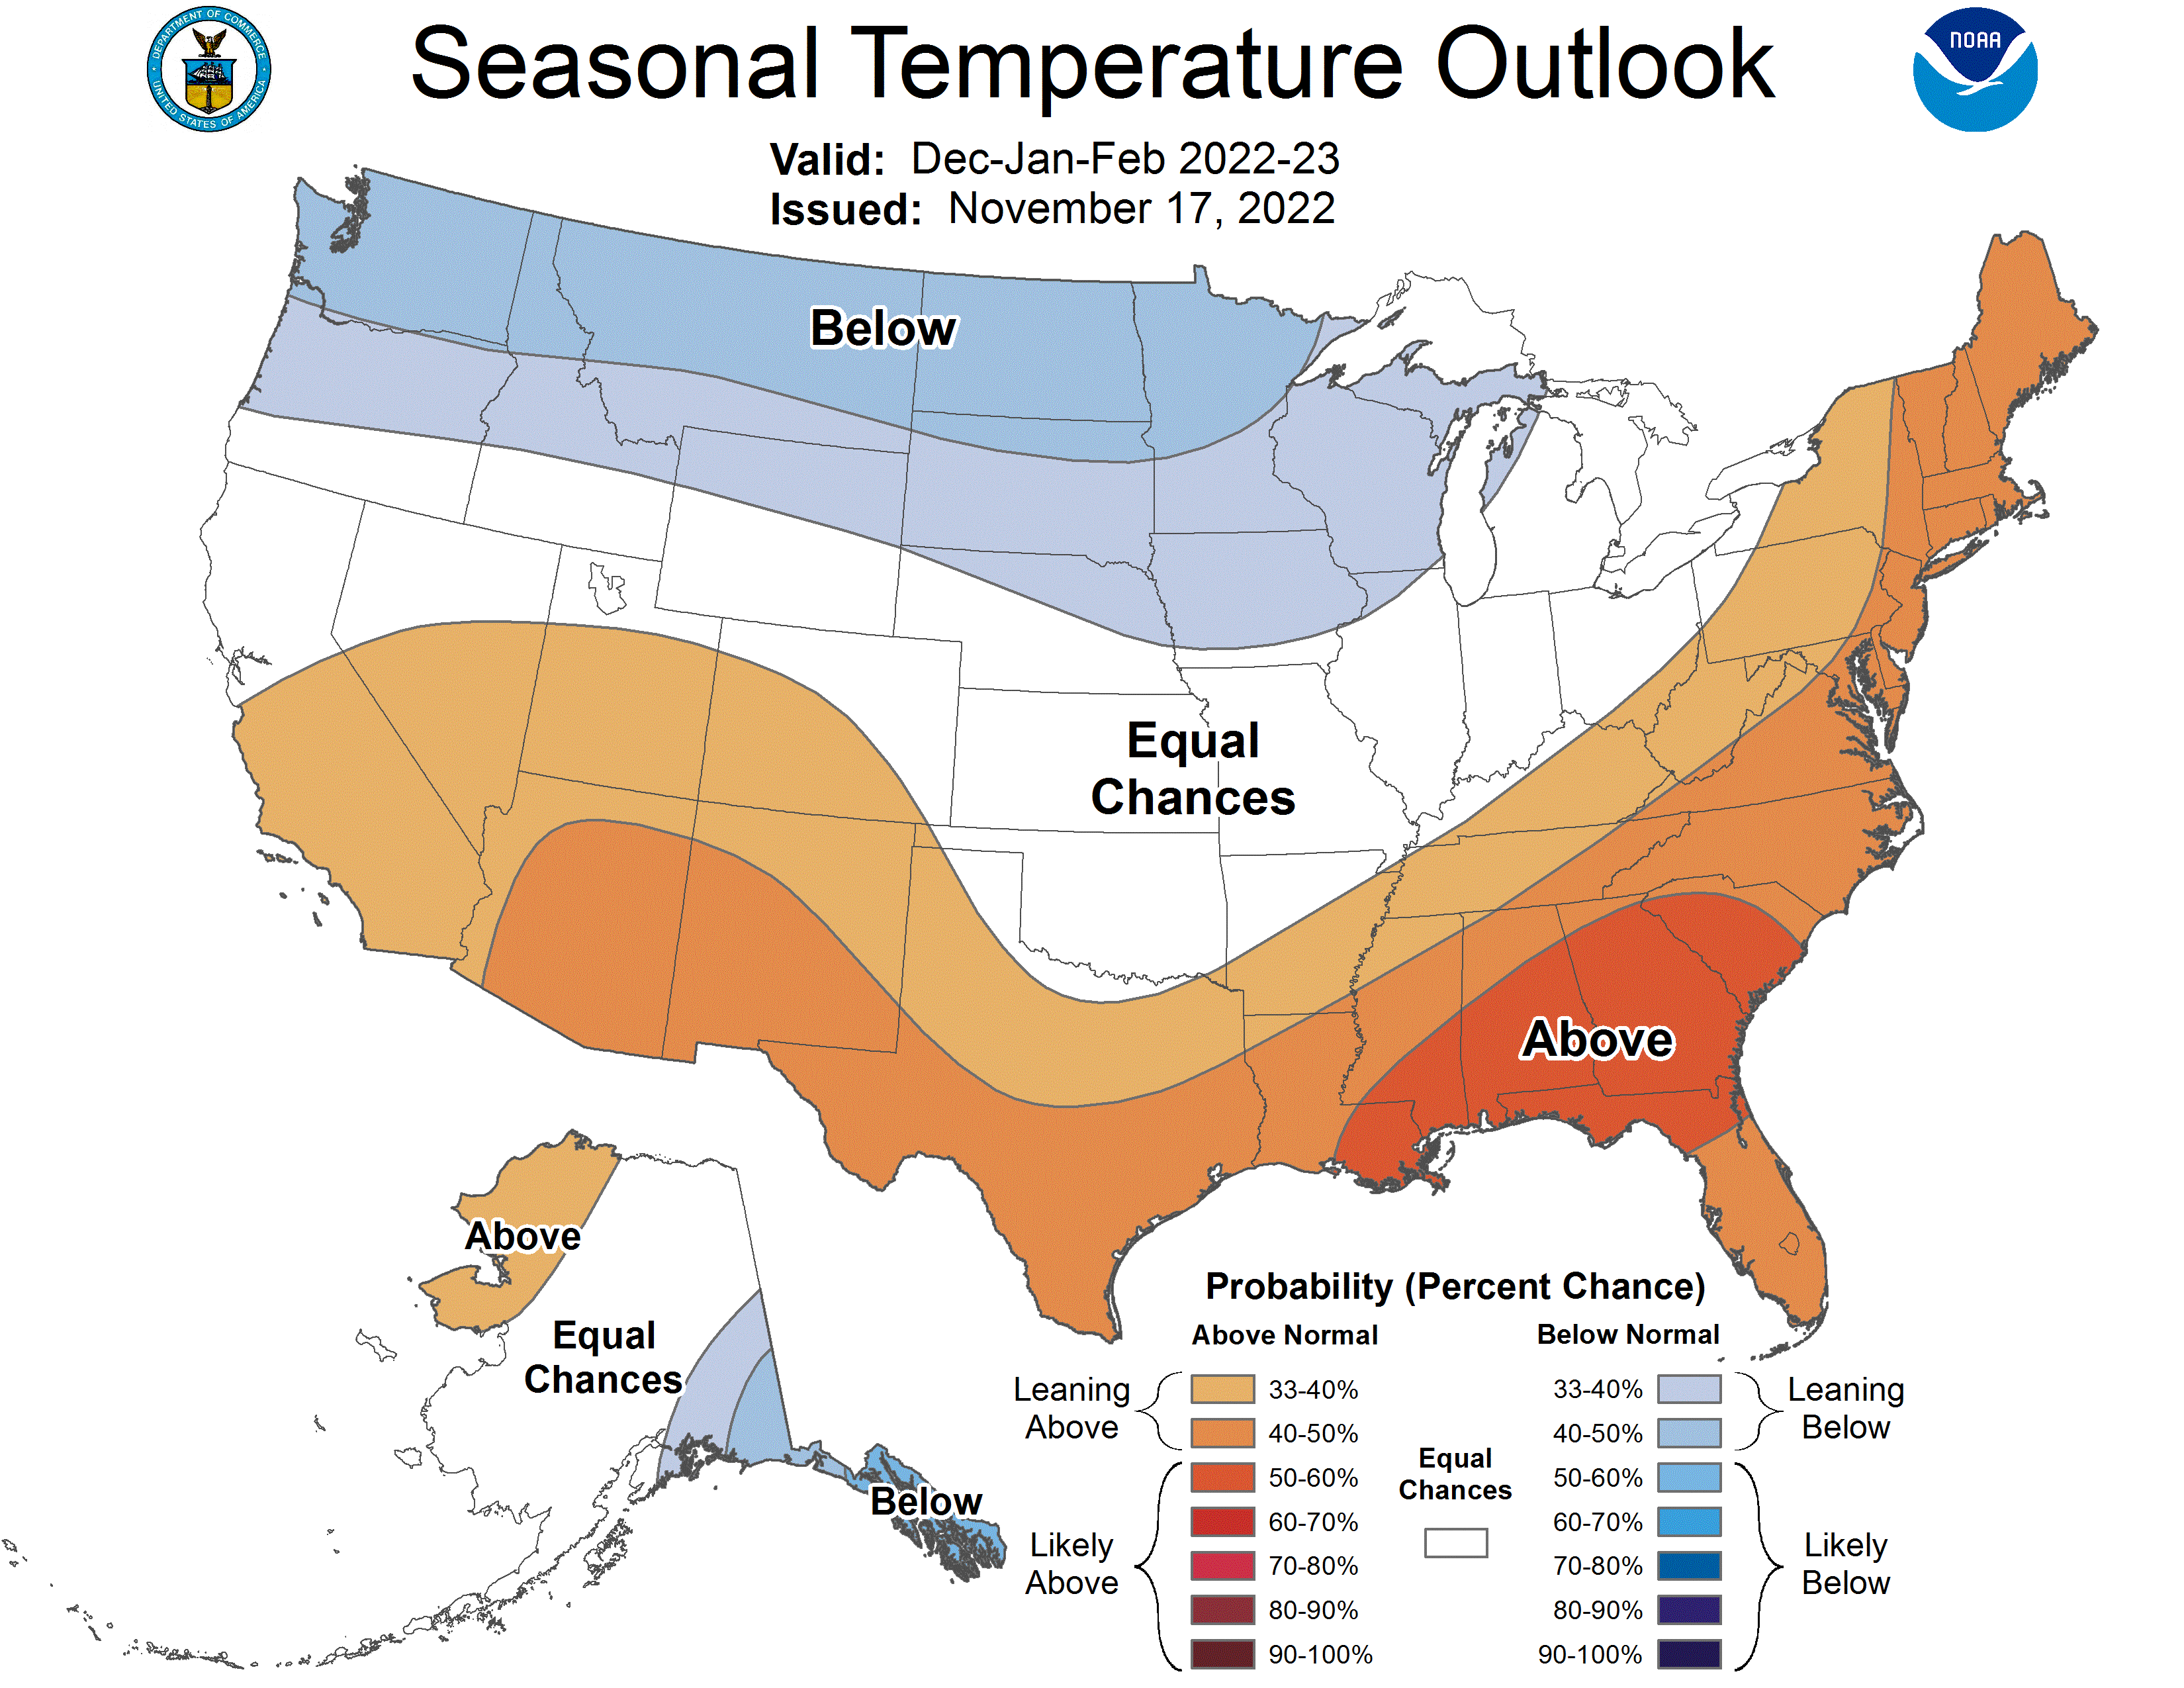 2022-2023 Winter Weather Outlook, Weather